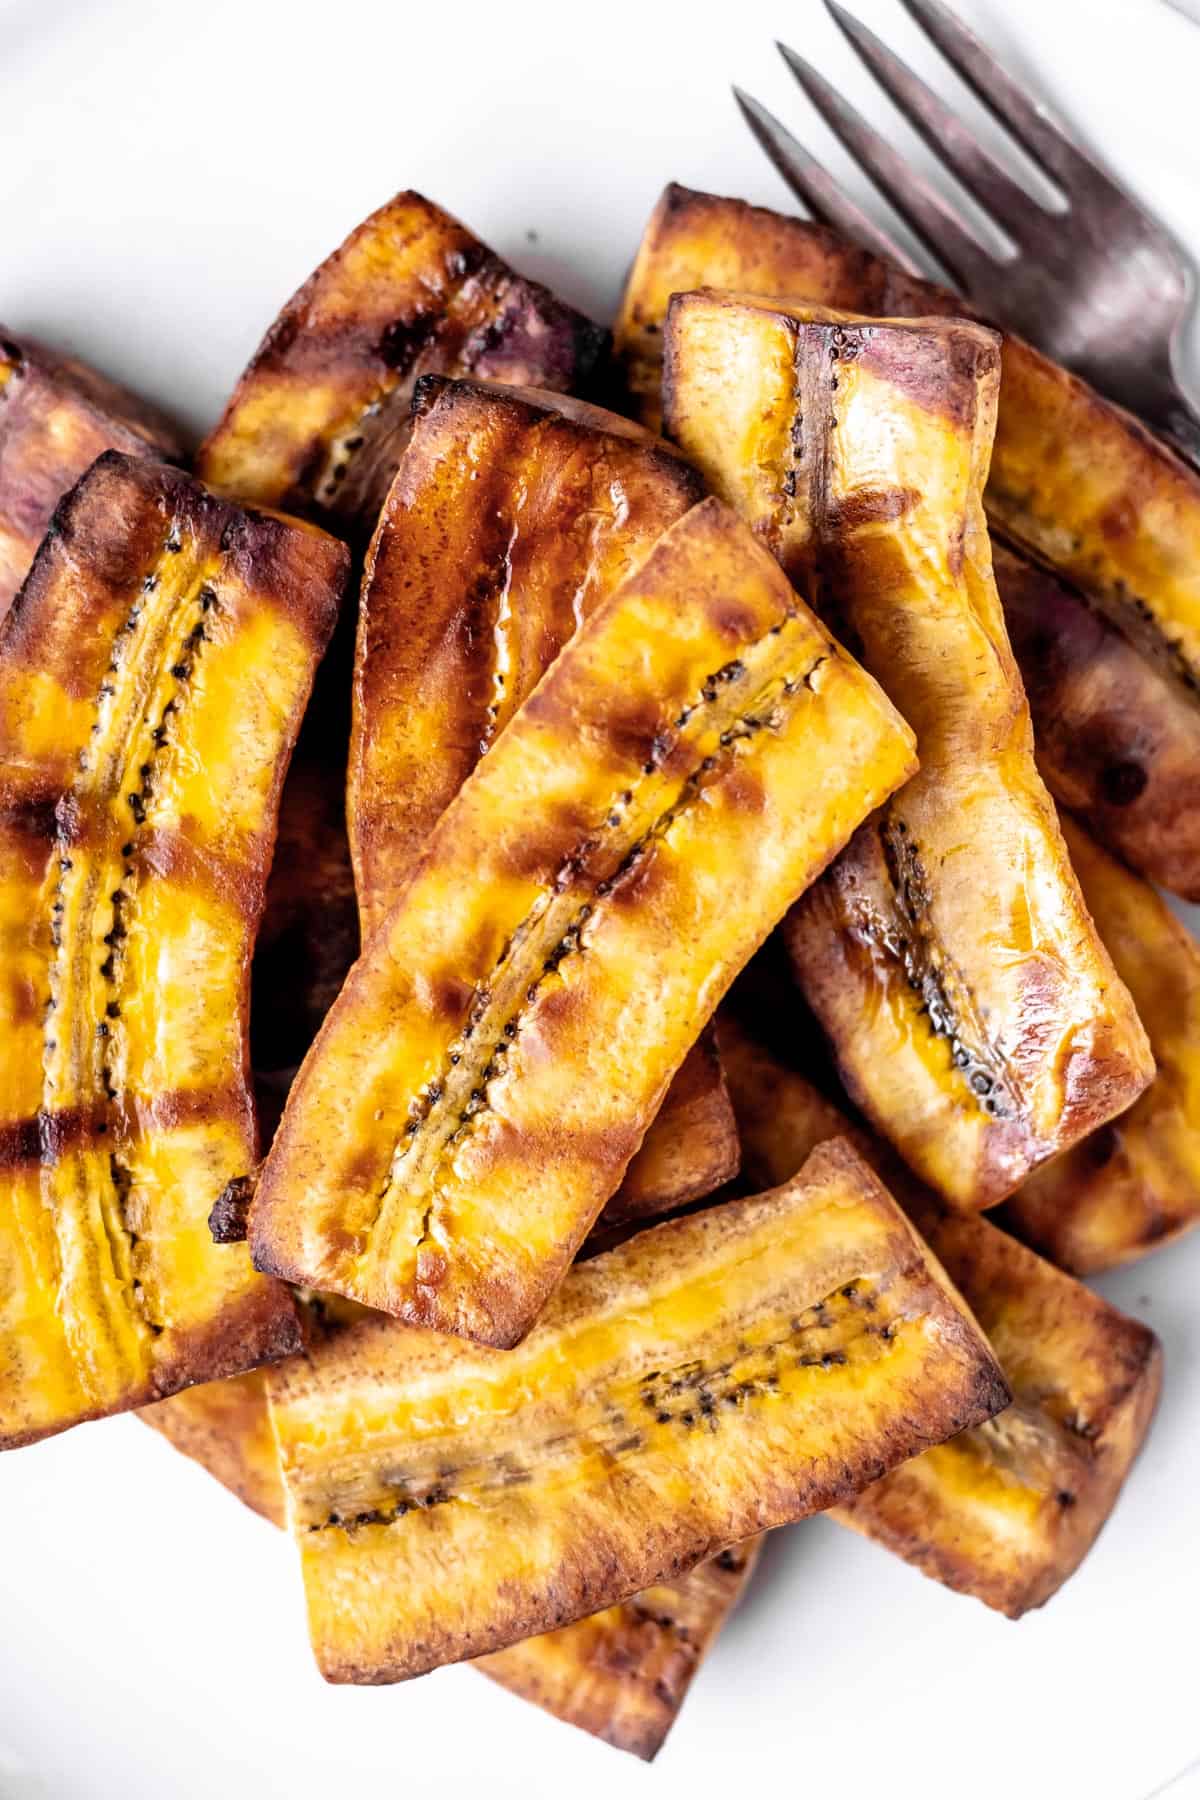 Overhead of a plate of grilled plantains with a fork on it.